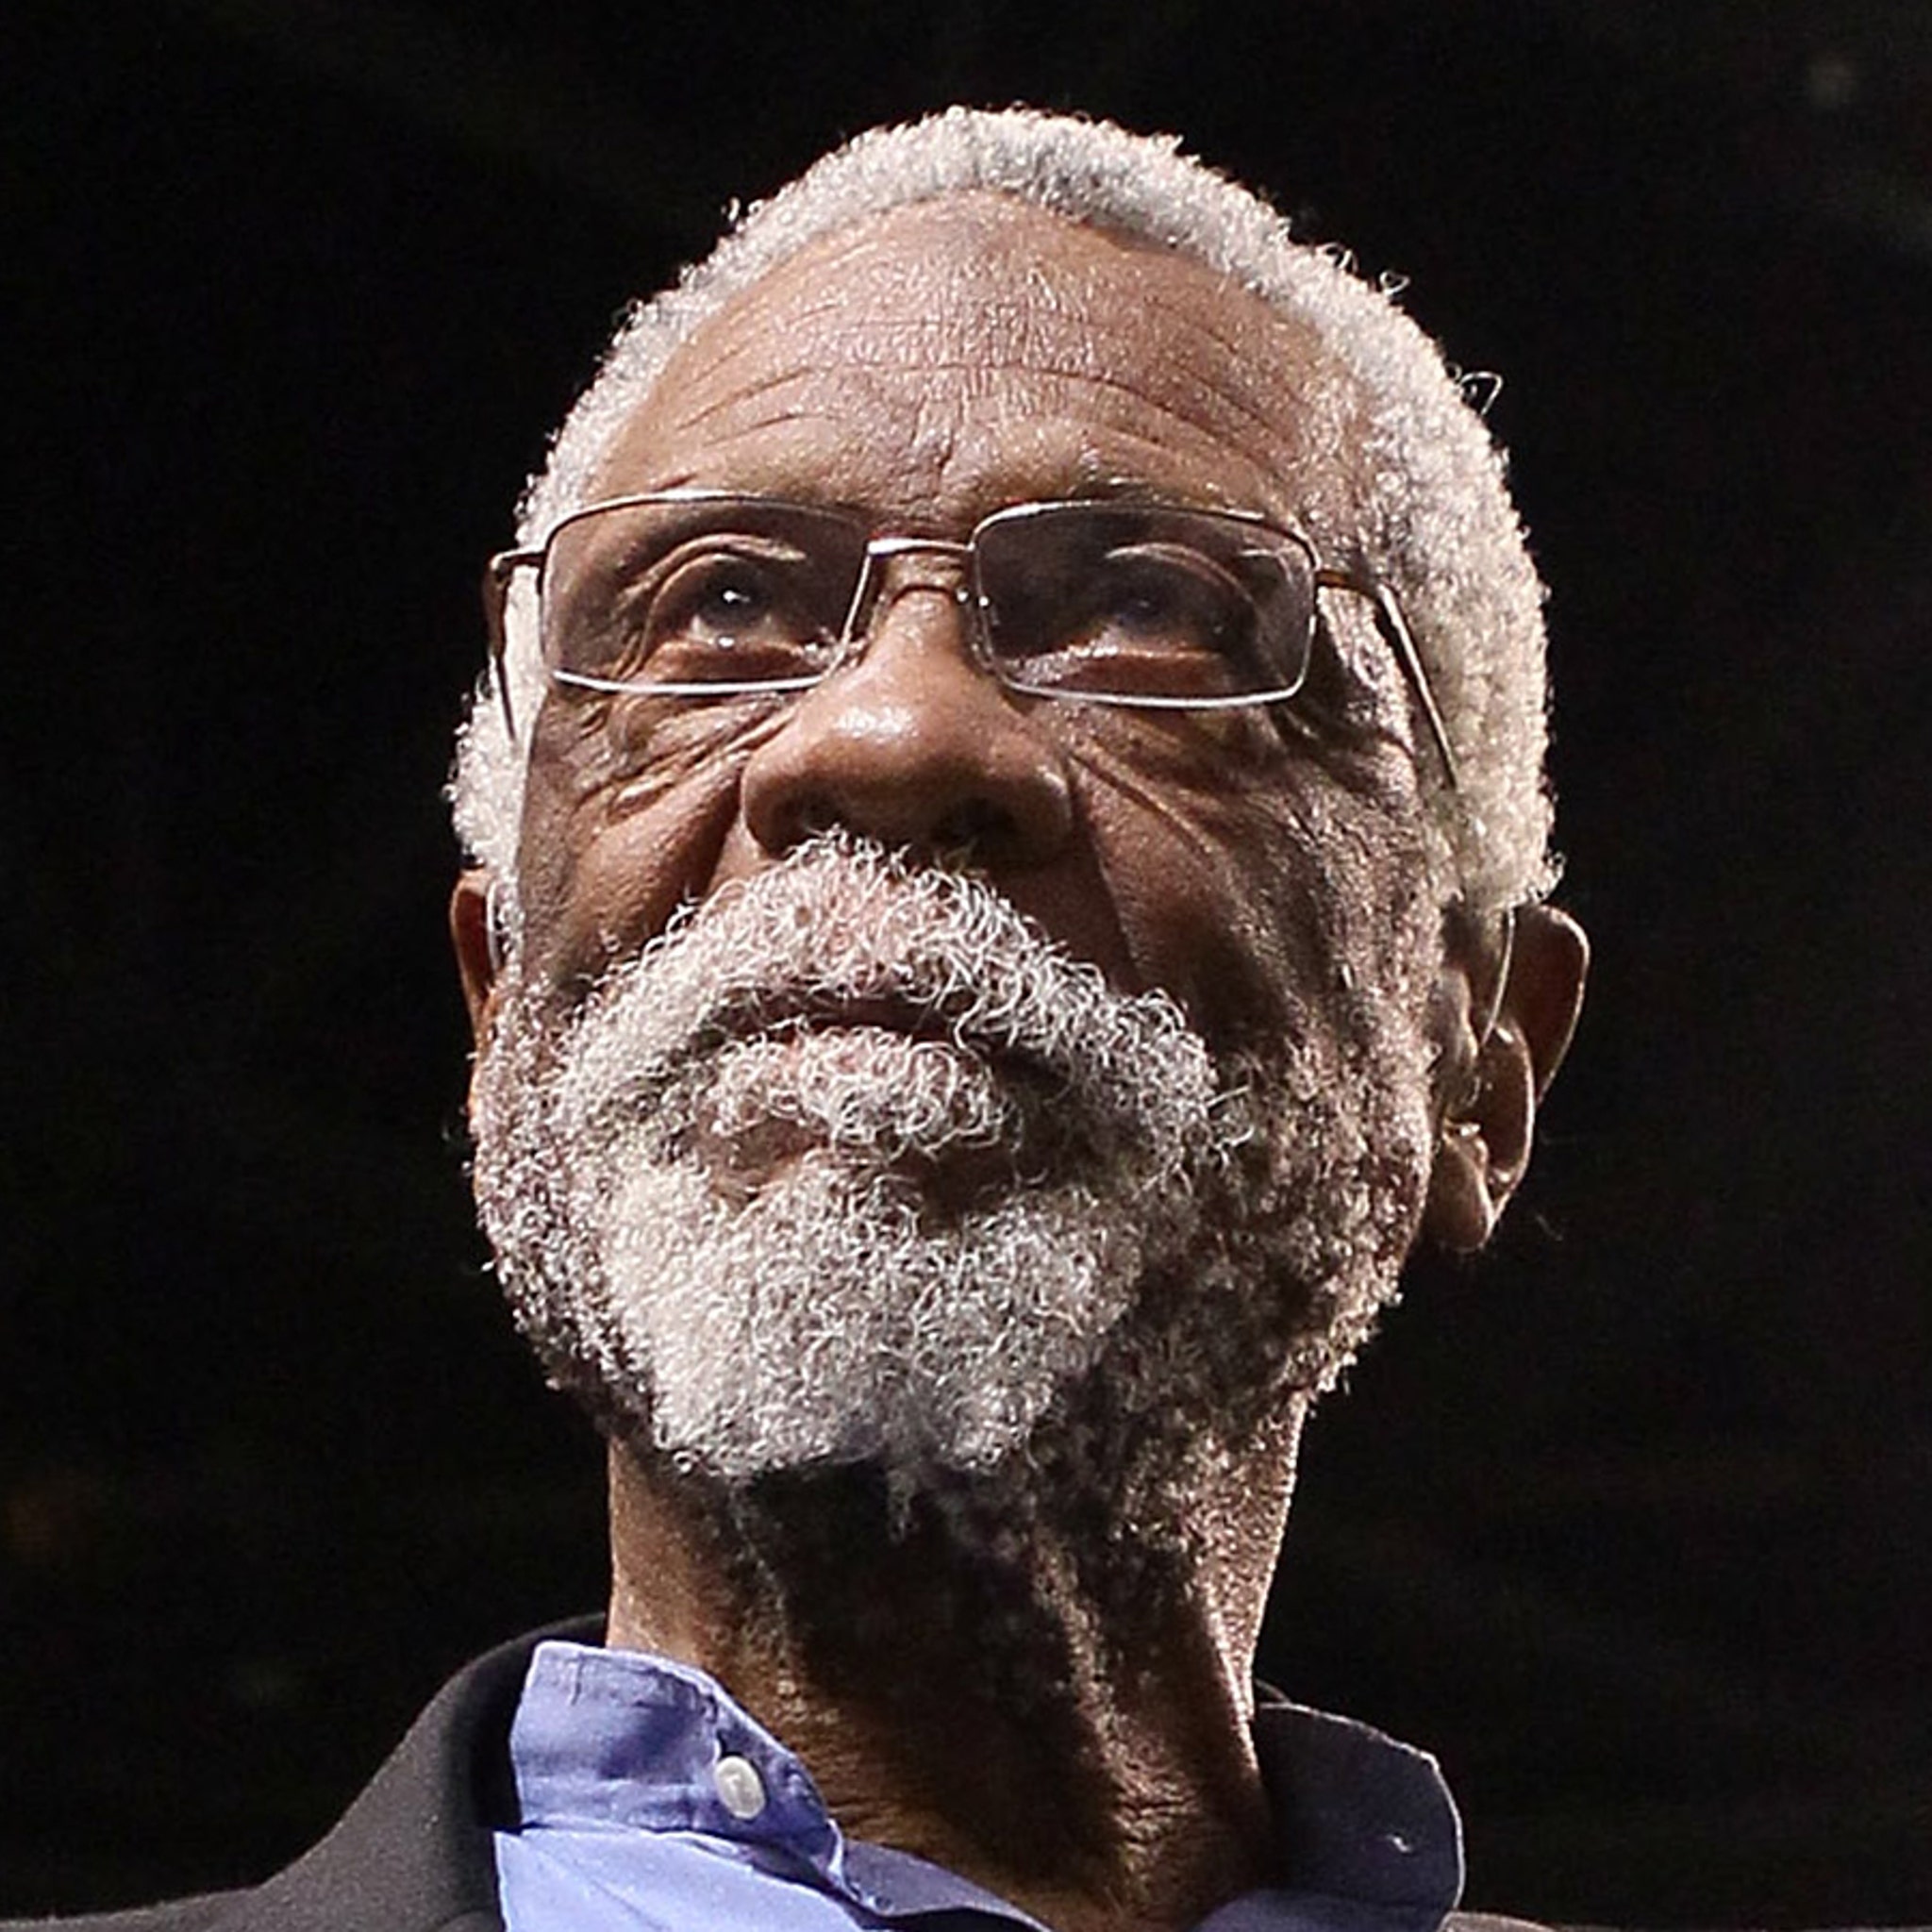 Bill Russell's No. 6 To Be Retired Throughout NBA; Current Players